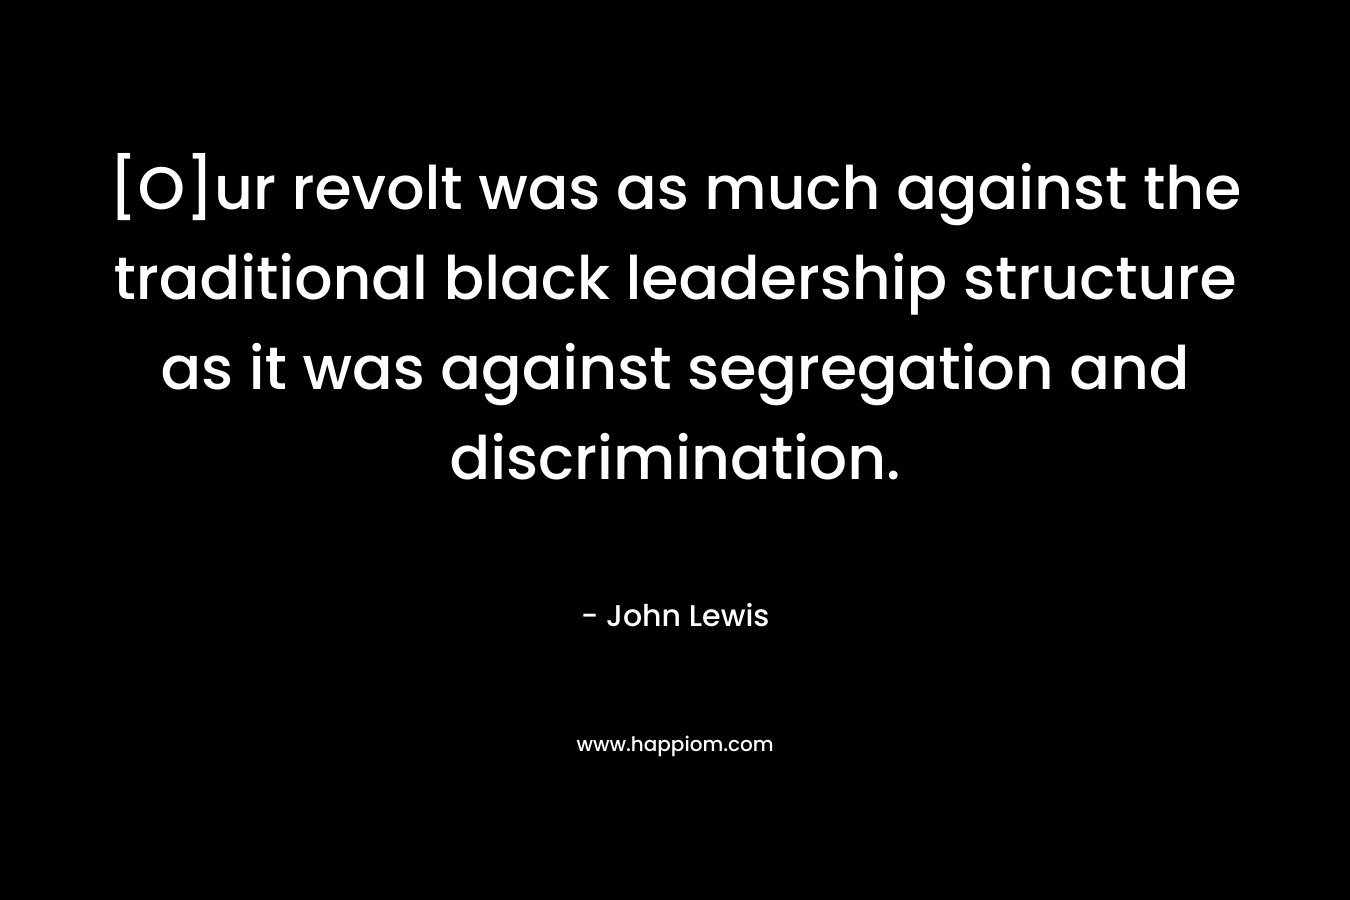 [O]ur revolt was as much against the traditional black leadership structure as it was against segregation and discrimination. – John Lewis